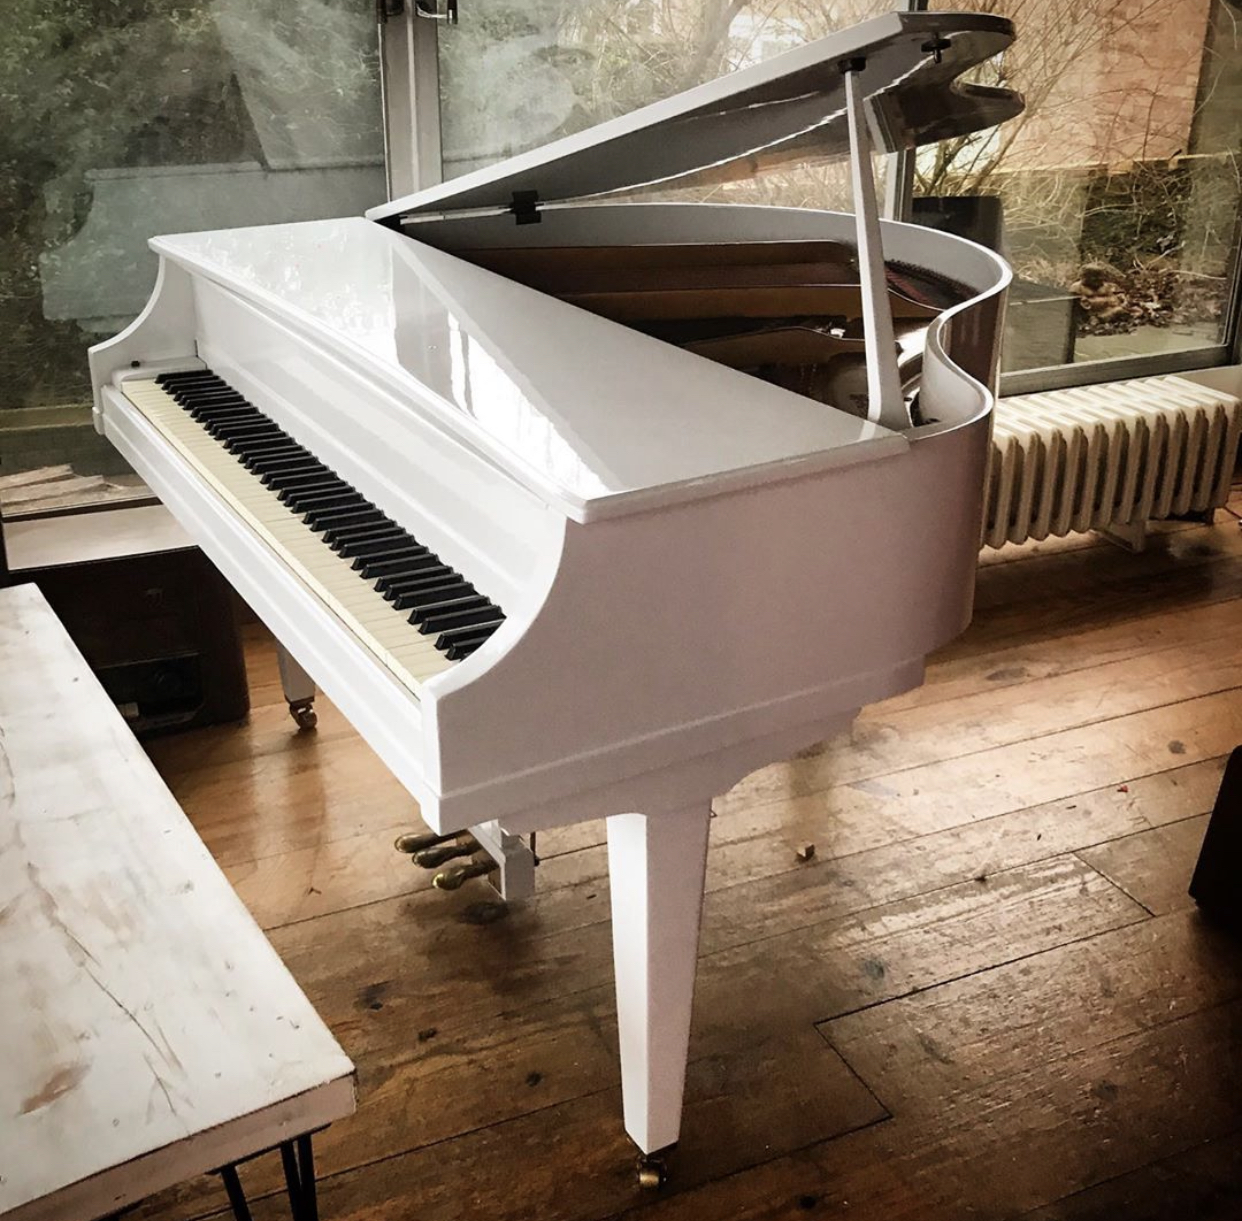 Piano White Little download the new